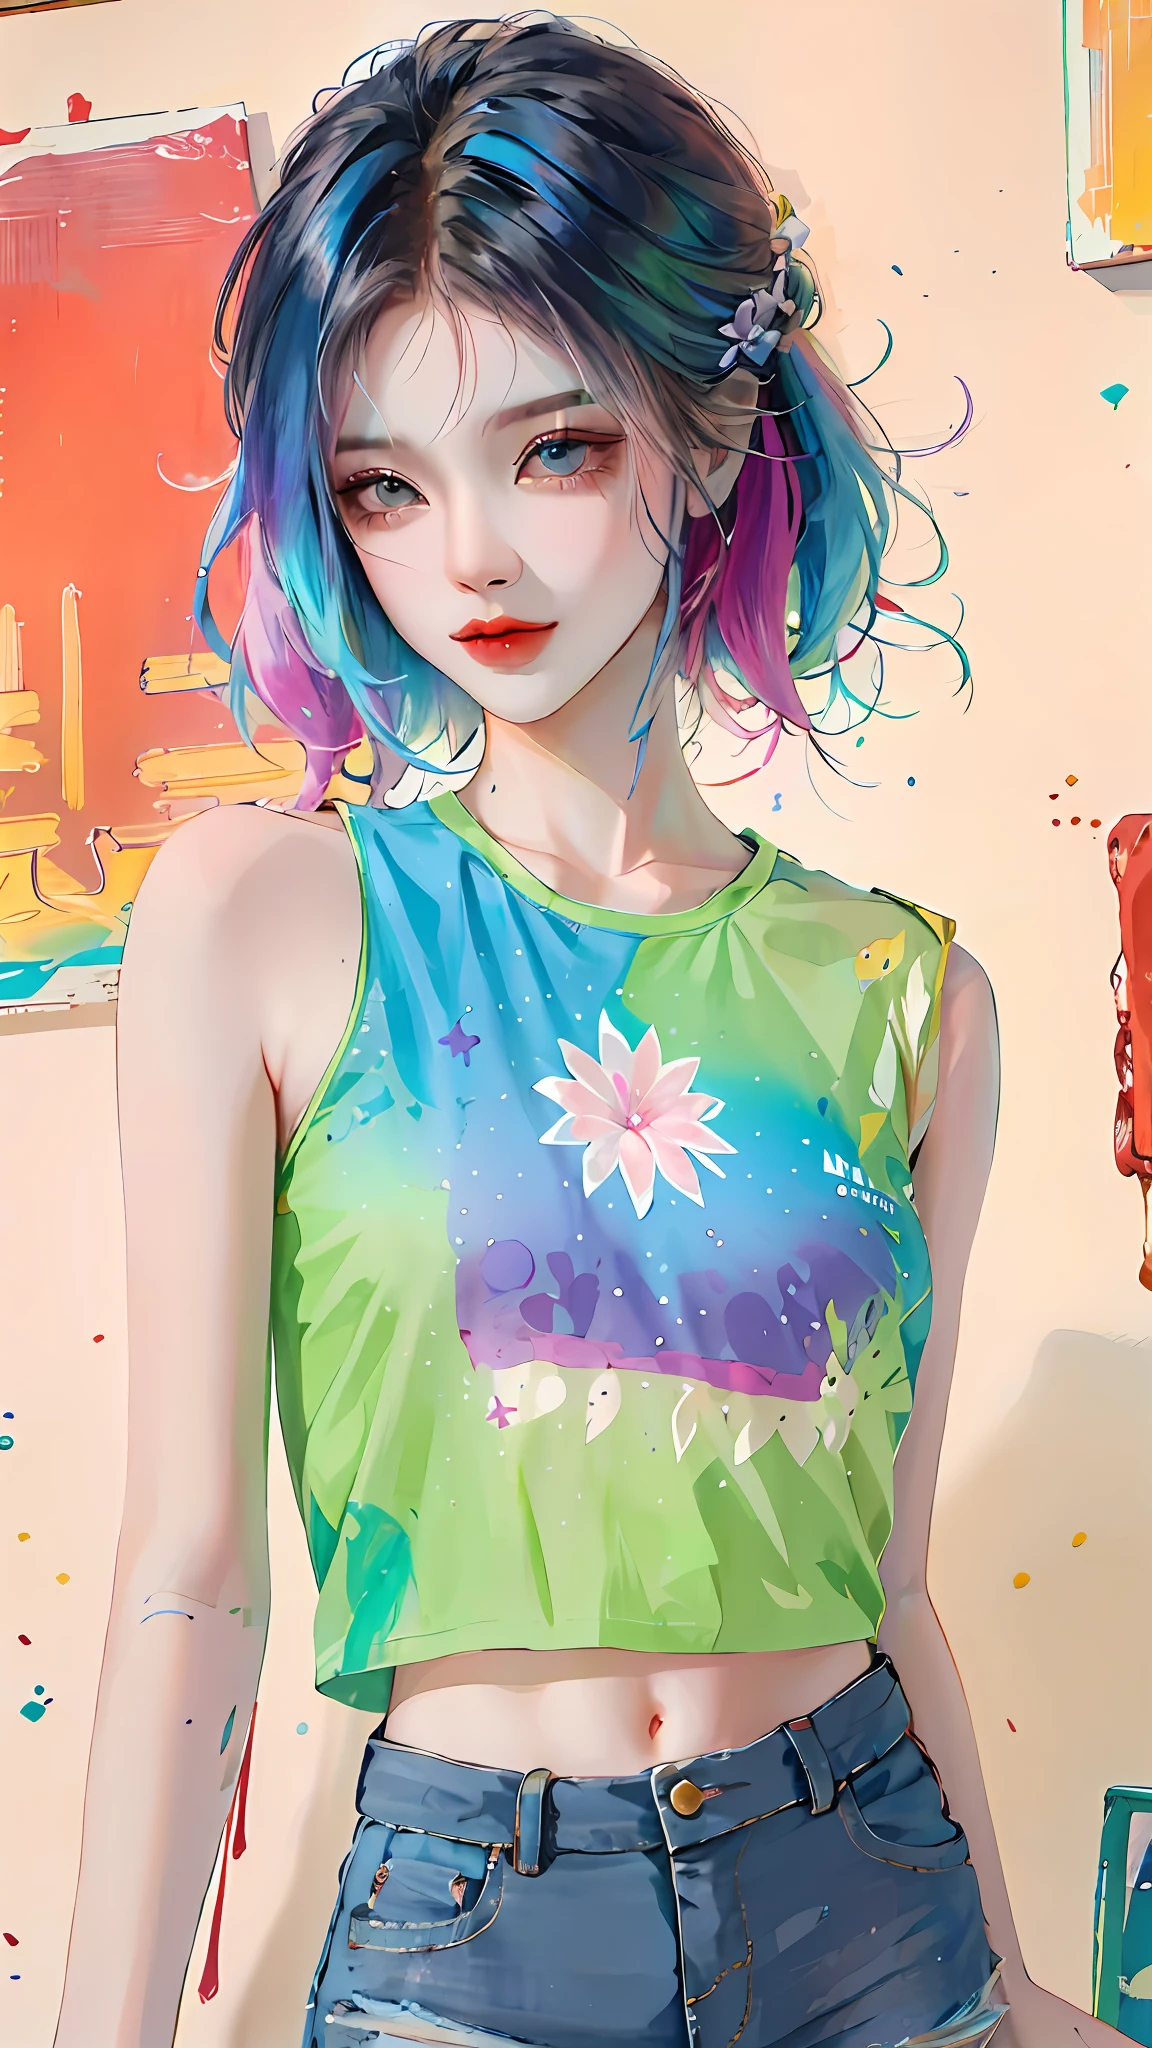 arafed woman with blue hair and a green top with flowers, colorful pigtail, with sprouting rainbow hair, anime inspired, anime girl with cosmic hair, vibrant fantasy style, cute colorful adorable, flower butterfly vest, colorful]”, y 2 k cutecore clowncore, rossdraws pastel vibrant, unearthly art style, colorful, rossdraws cartoon vibrant